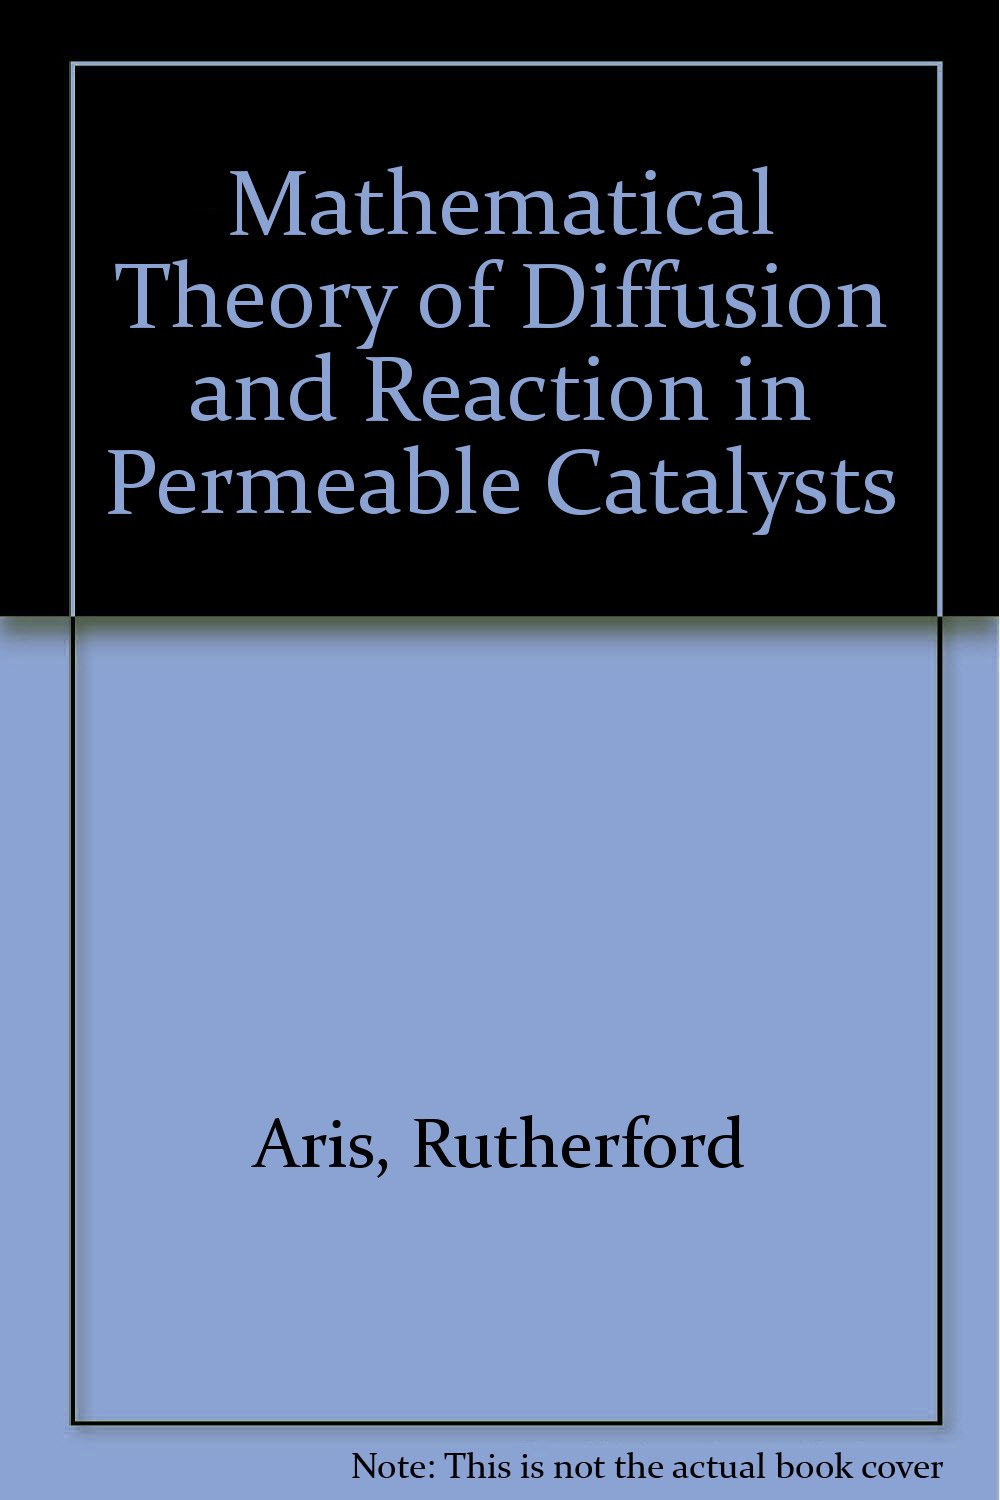 Rutherford Aris The mathematical theory of diffusion and reaction in permeable catalysts. 2 Questions of uniqueness, stability, and transient behaviour 